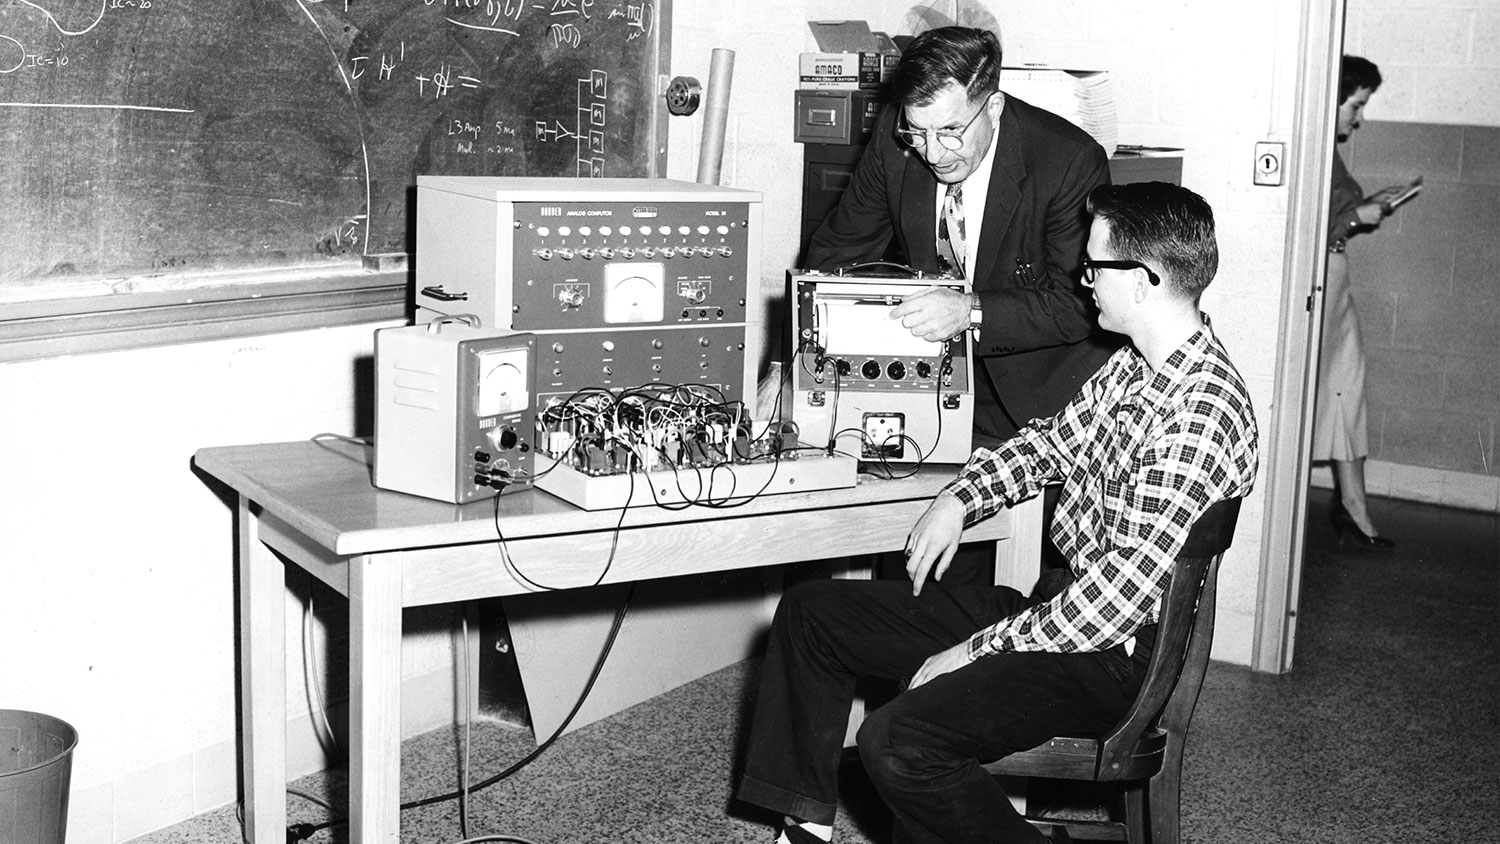 In this photo, taken in December 1956, Dr. John Cell shows student James Wallace how to operate a Donner Model 30 analog “computor.”